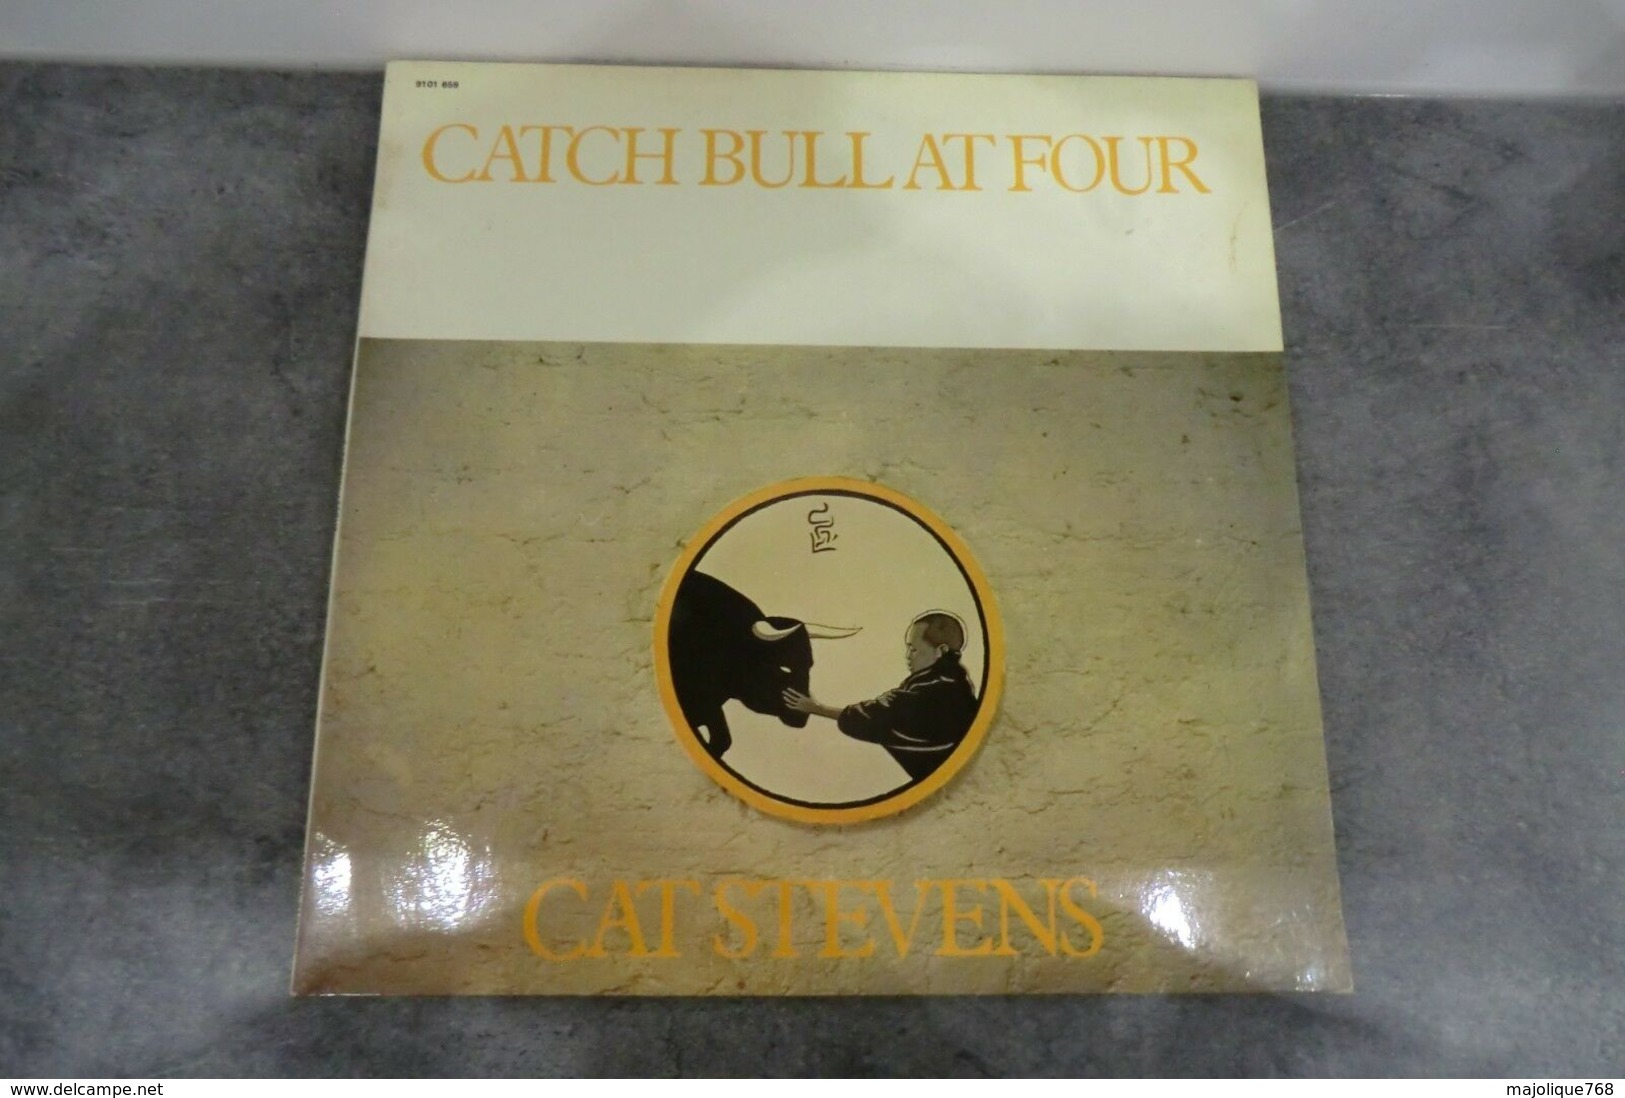 Disque - Cat Stevens - Catch Bull At Four - Island Records 9101659 - ILPS 9203 -1972 - Rock